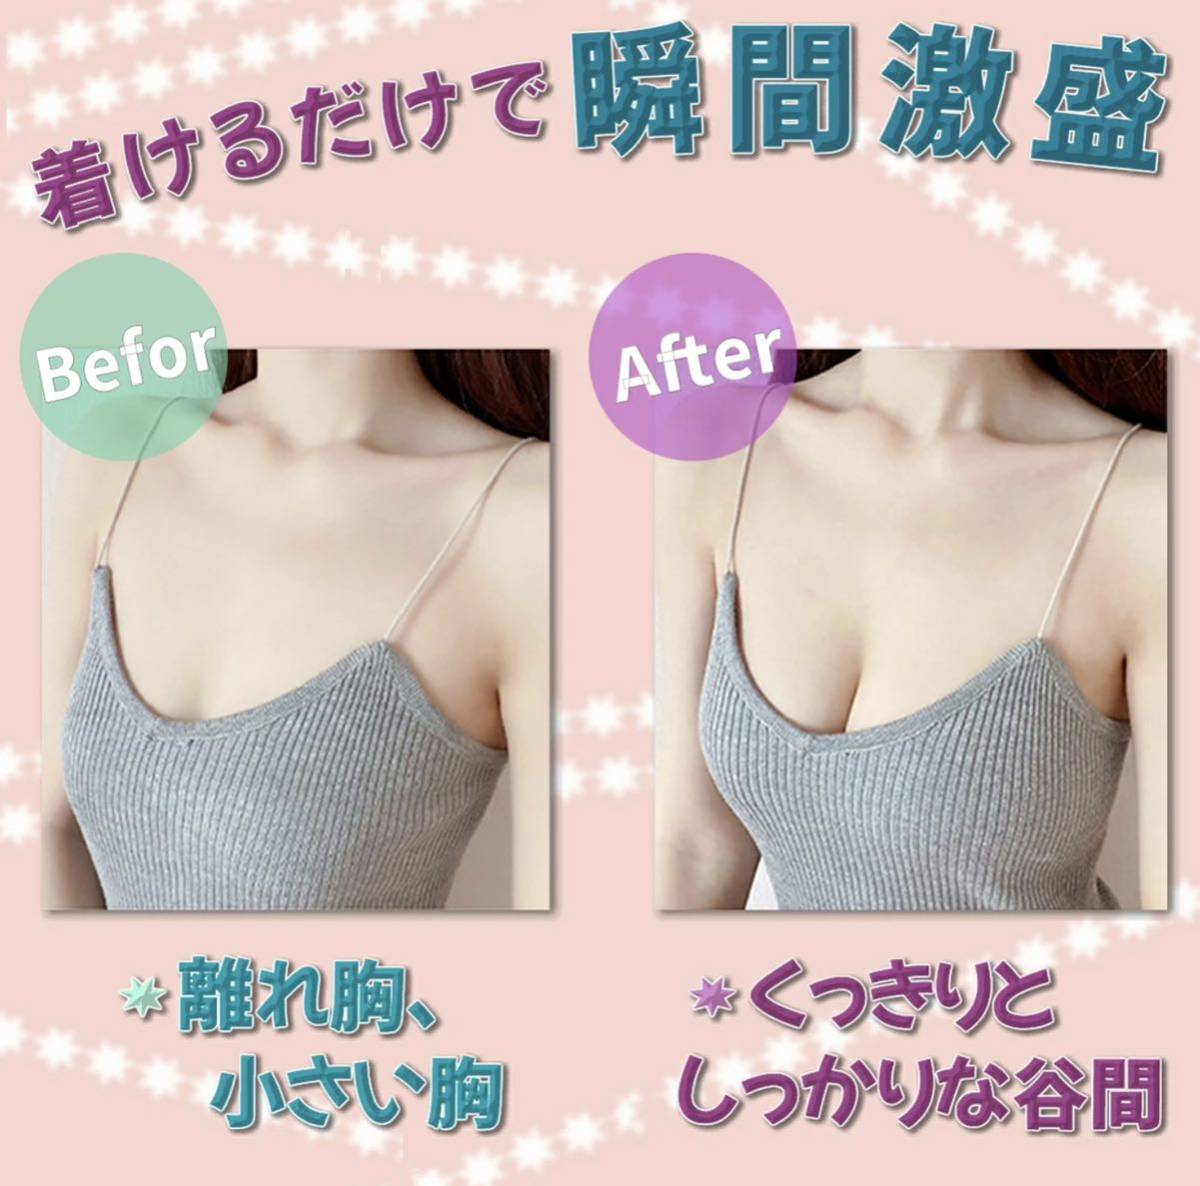  NuBra 3D solid 4 times peak silicon blaB cup ultra peak nubra swimsuit bikini dress cosplay ... interval keep bust make-up anonymity * same day shipping 